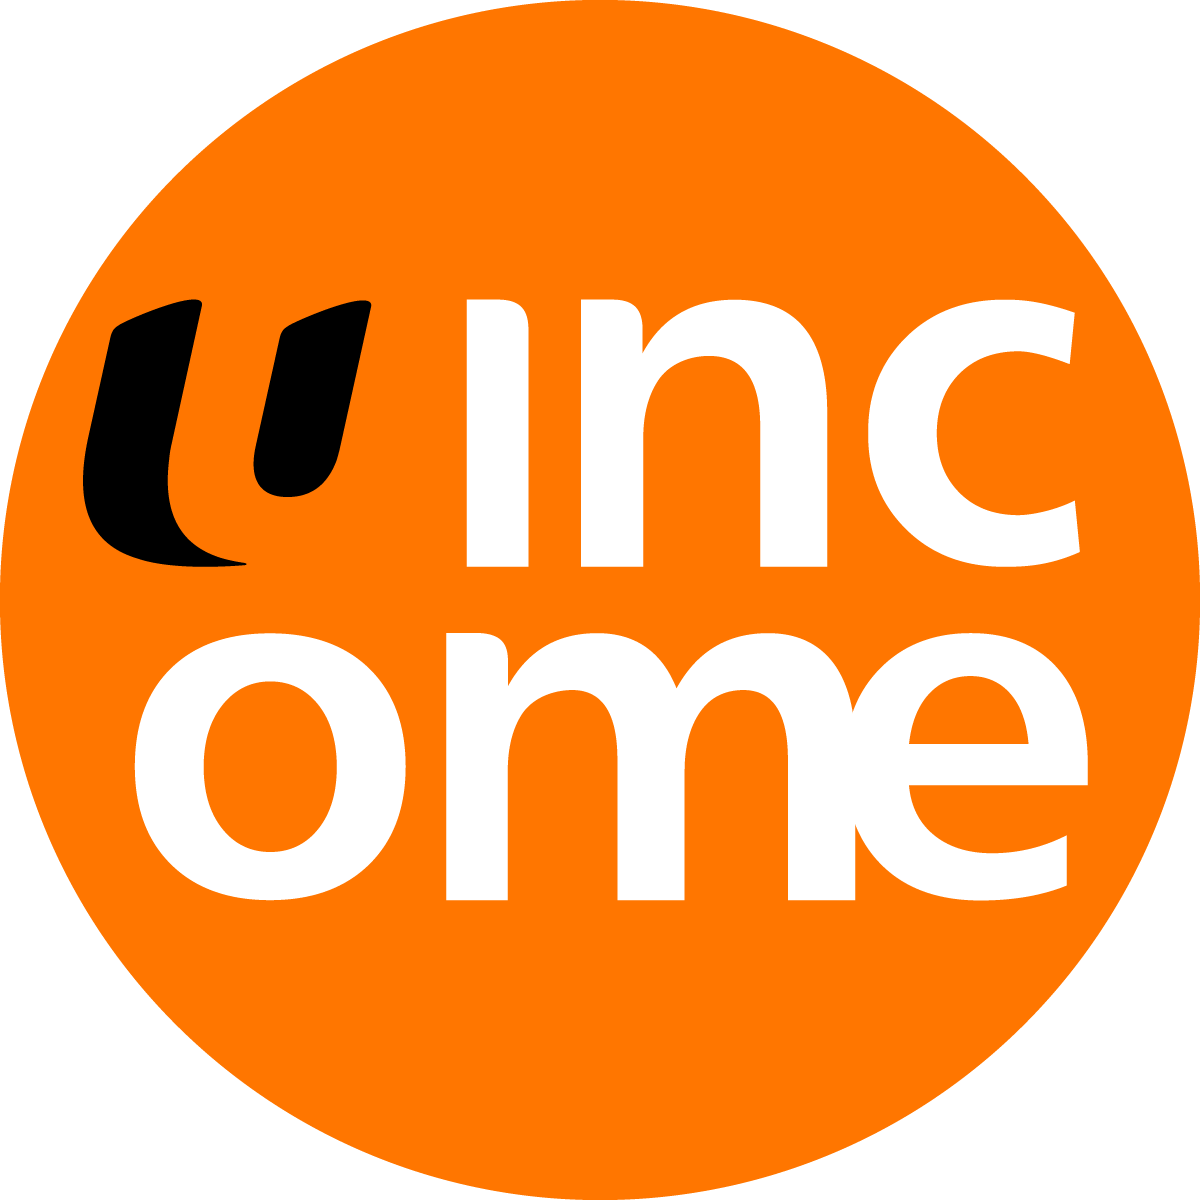 ntuc income travel insurance contact number